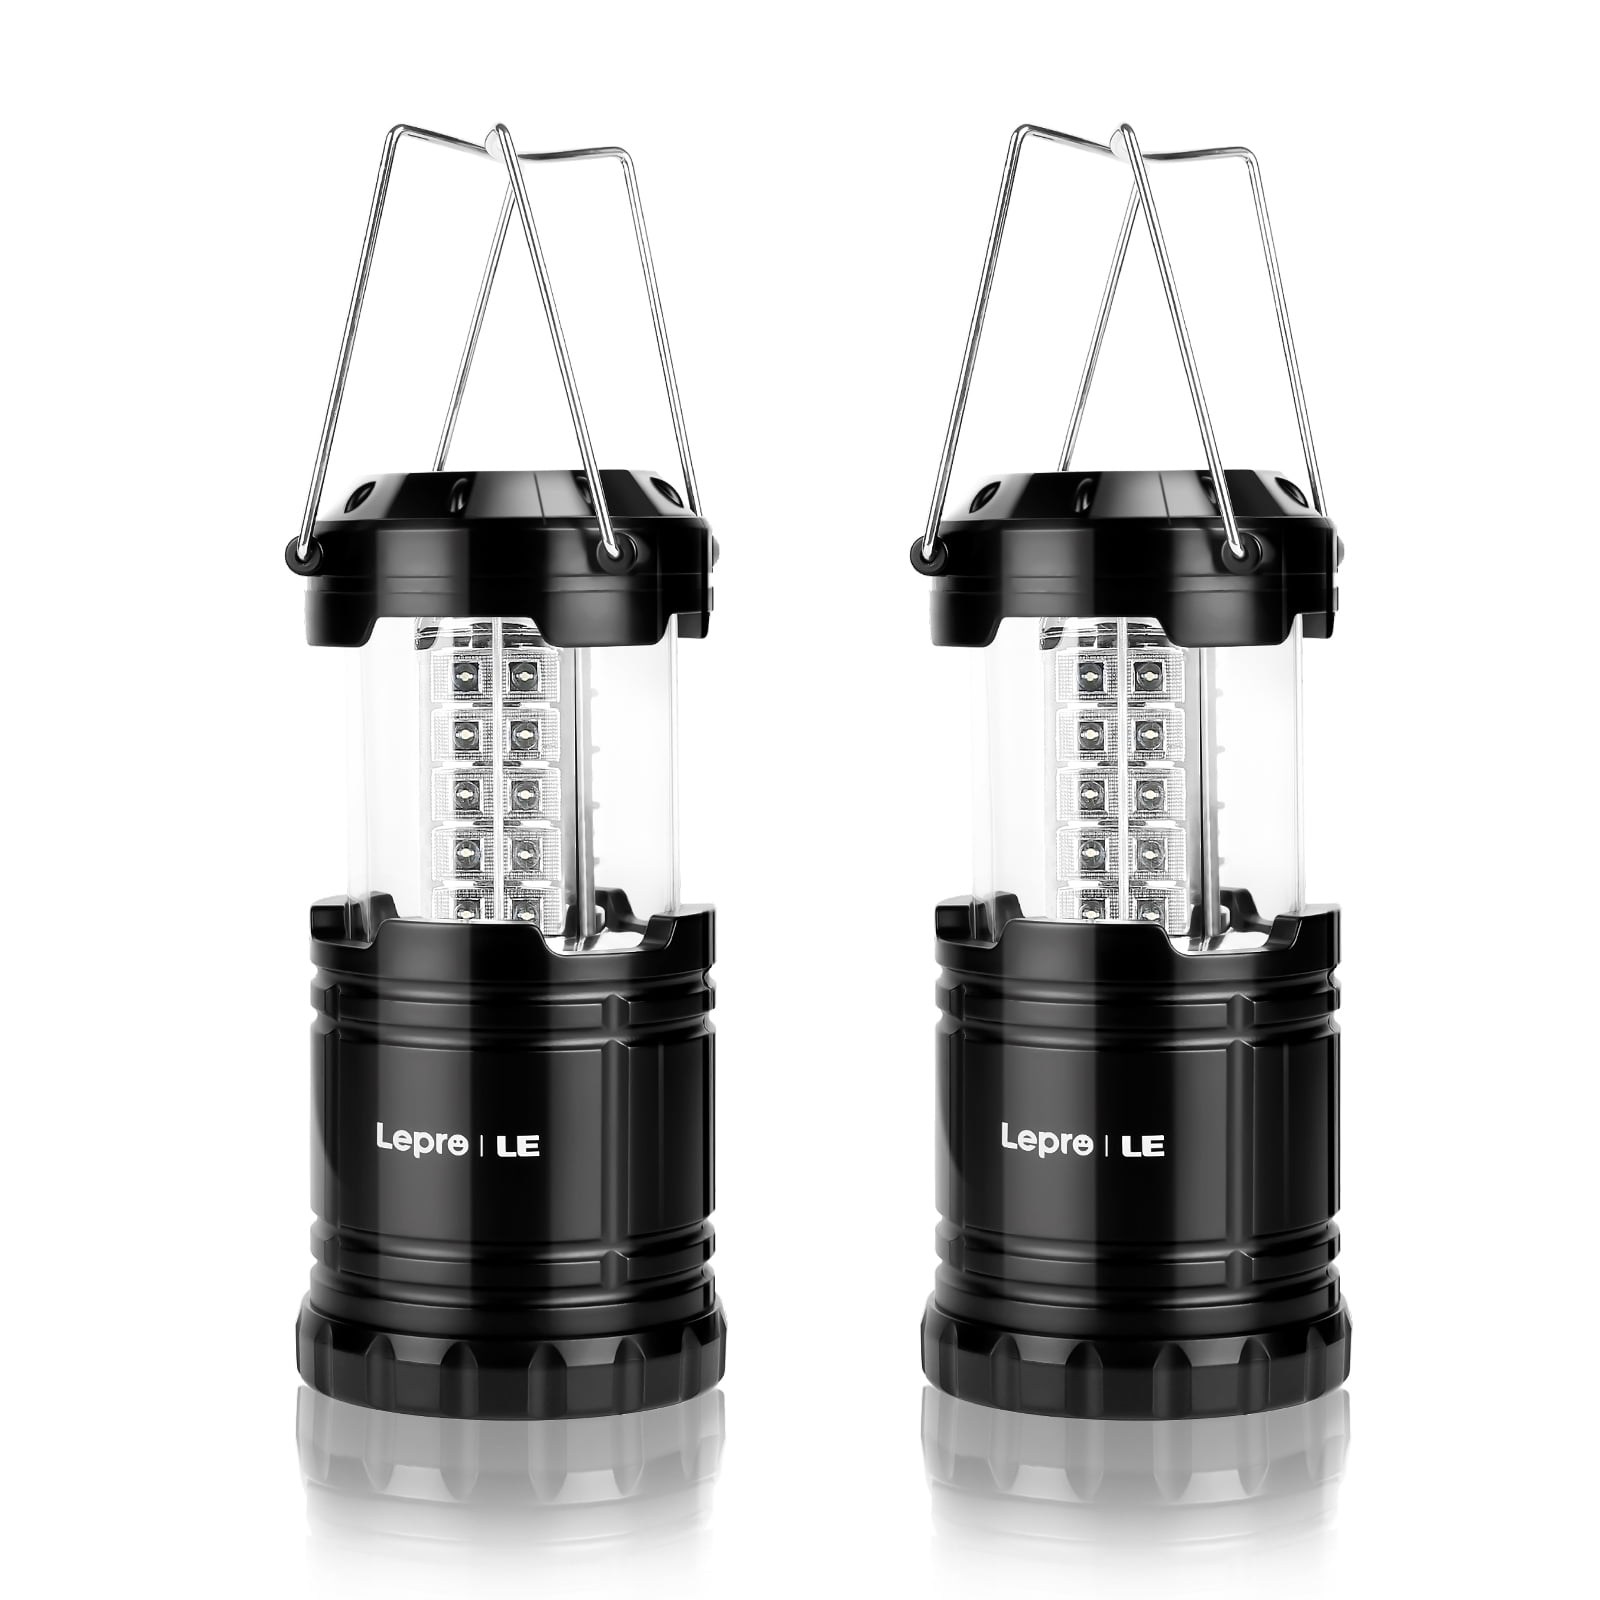 Hyuduo 4 pcs LED Camping Lantern, Super Bright Portable Emergency Lanterns,  Survival Lamp with Compass for Outages,Other Outdoor Lighting